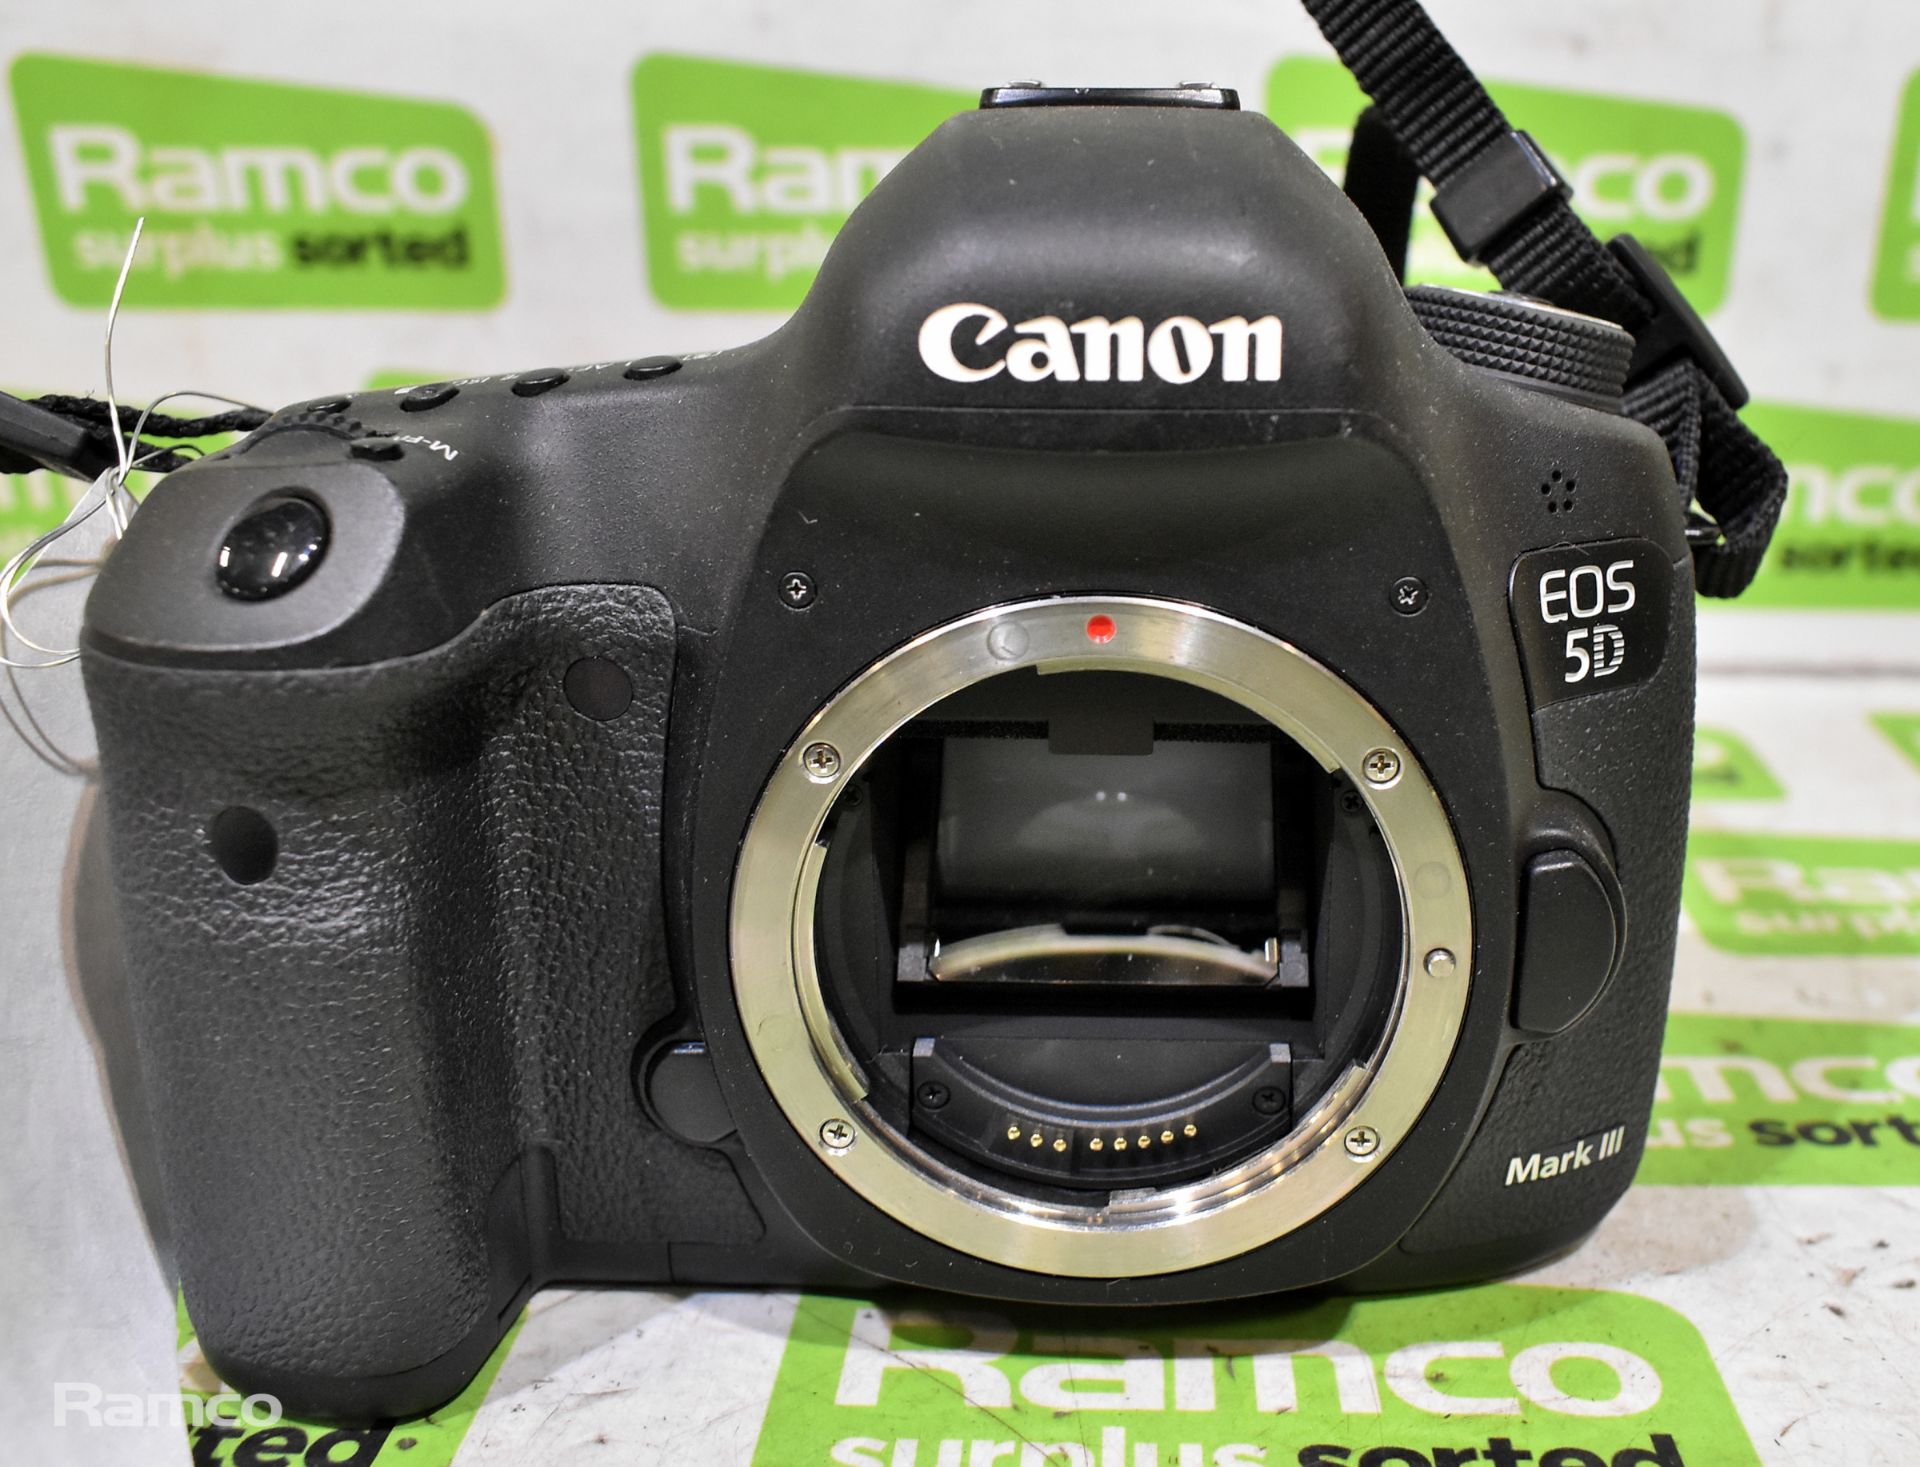 Canon EOS 5D Mark lll DSLR camera (no battery) - Image 2 of 9